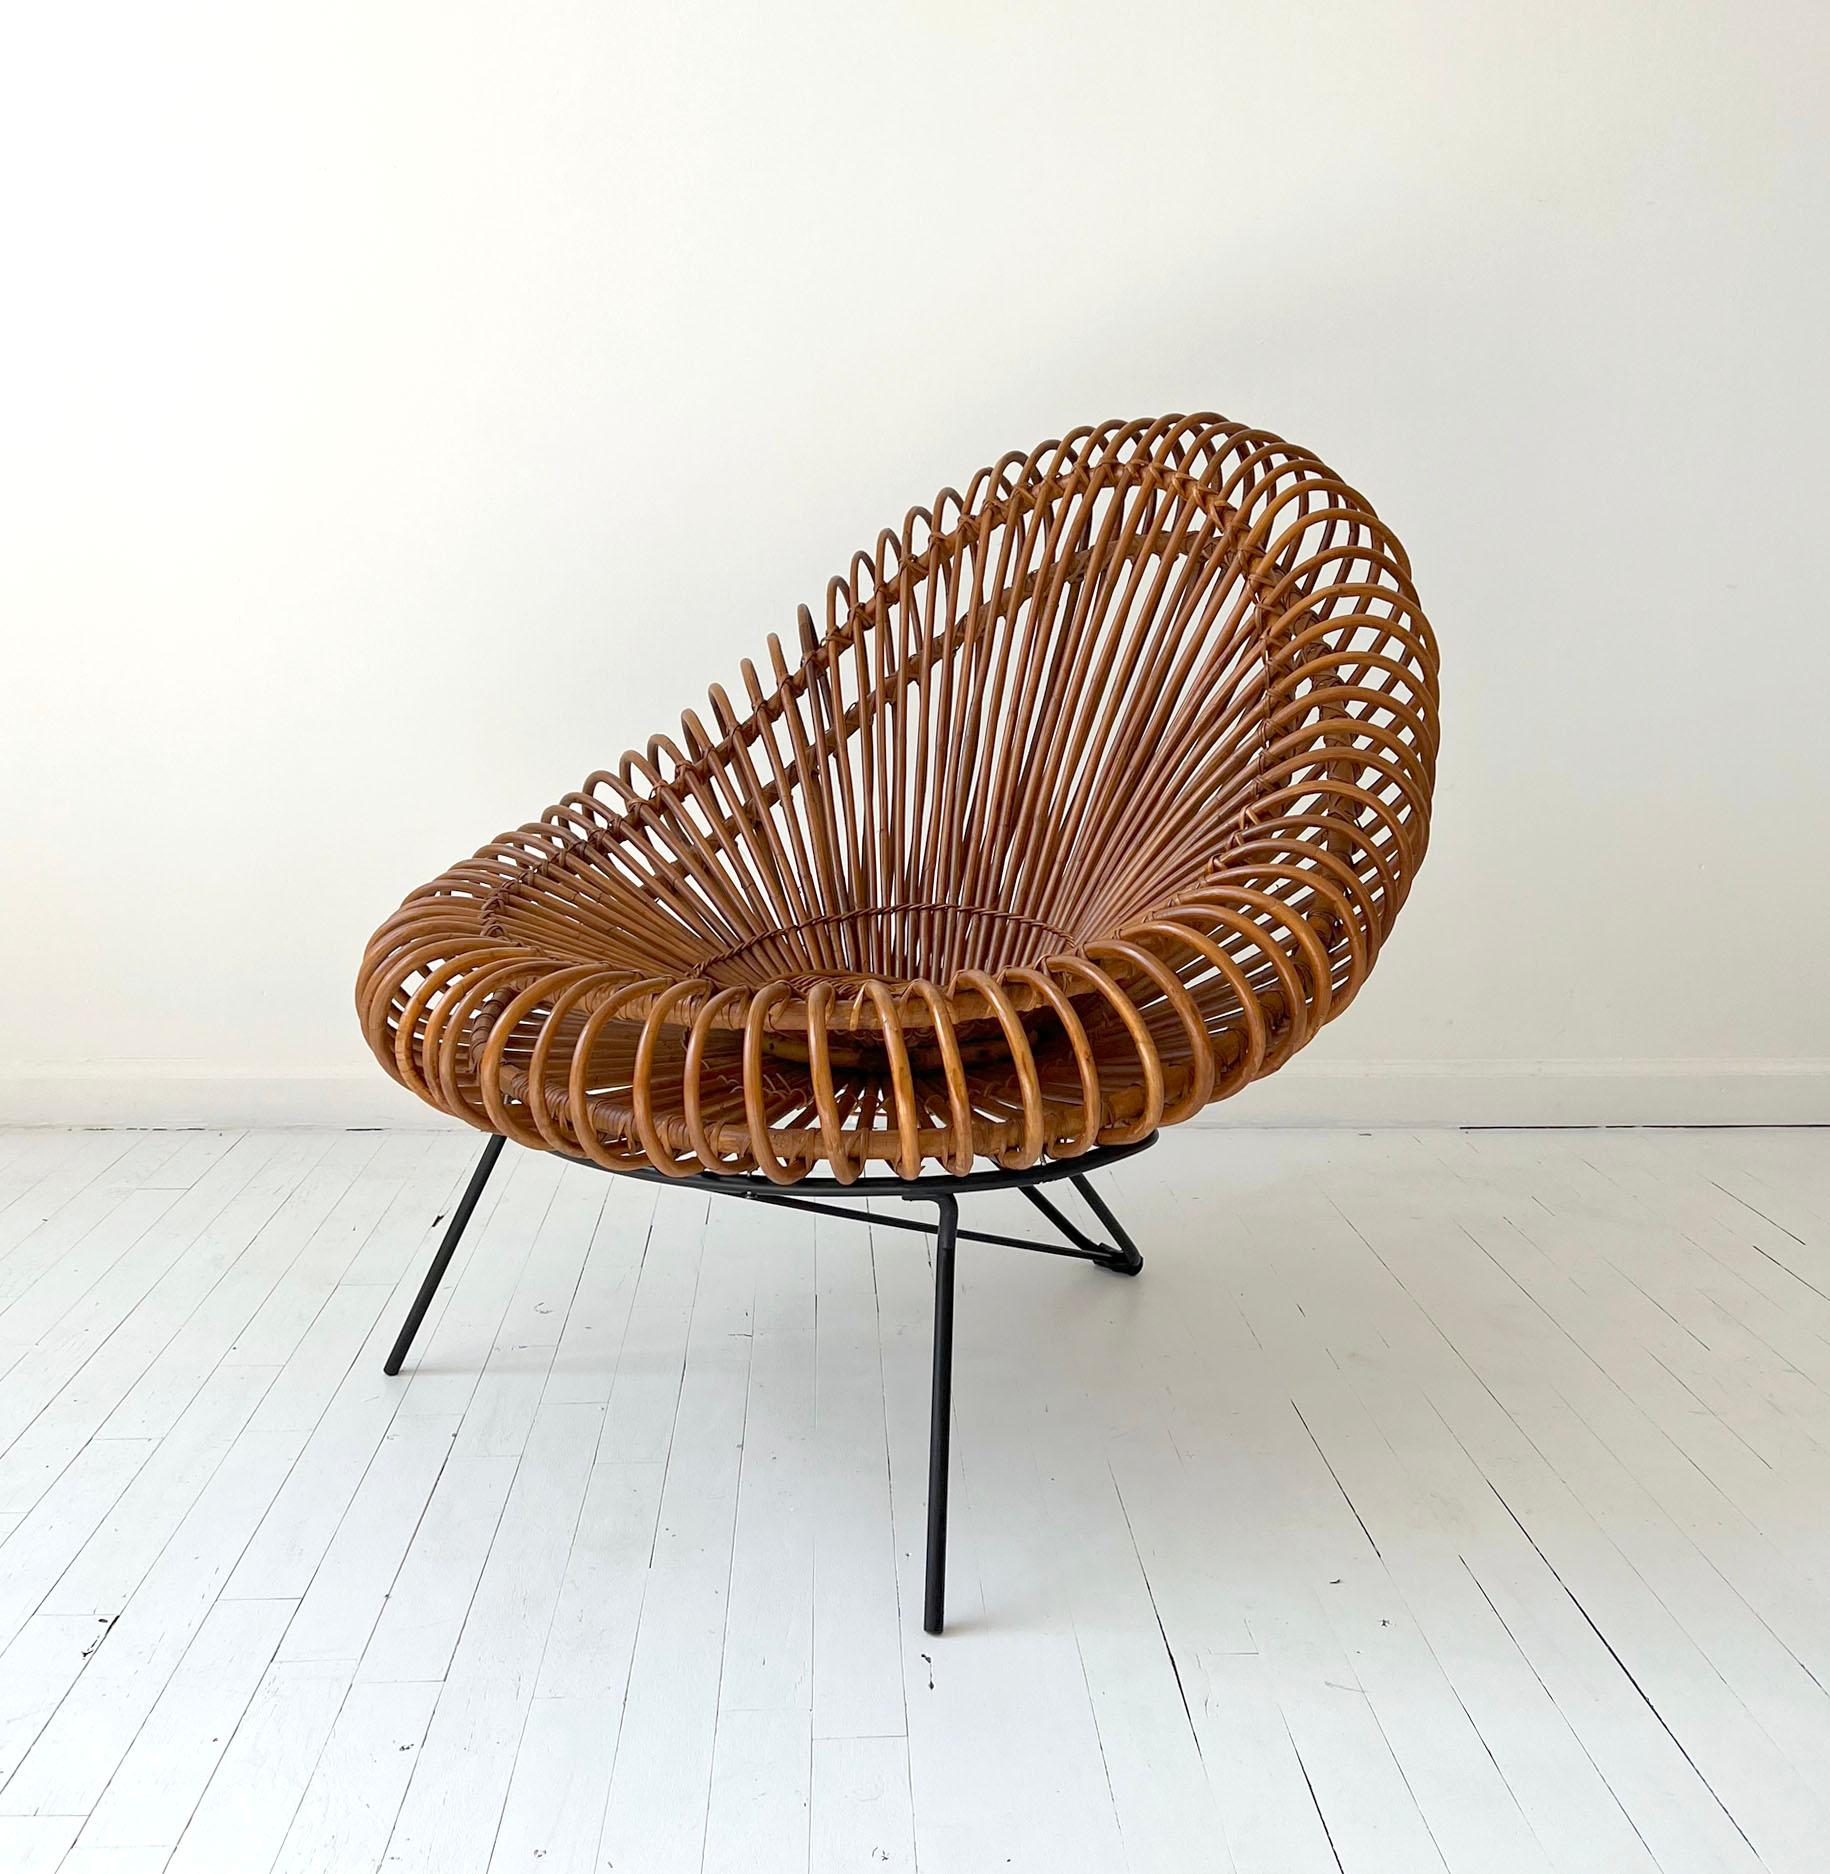 This beautiful woven rattan chair combines Janine Abraham’s imagination with Dirk Jan Rol’s architectural construction skills.

From the circular woven center to the shell of the seat, the craft of the designer and manufacturer is outstanding. The